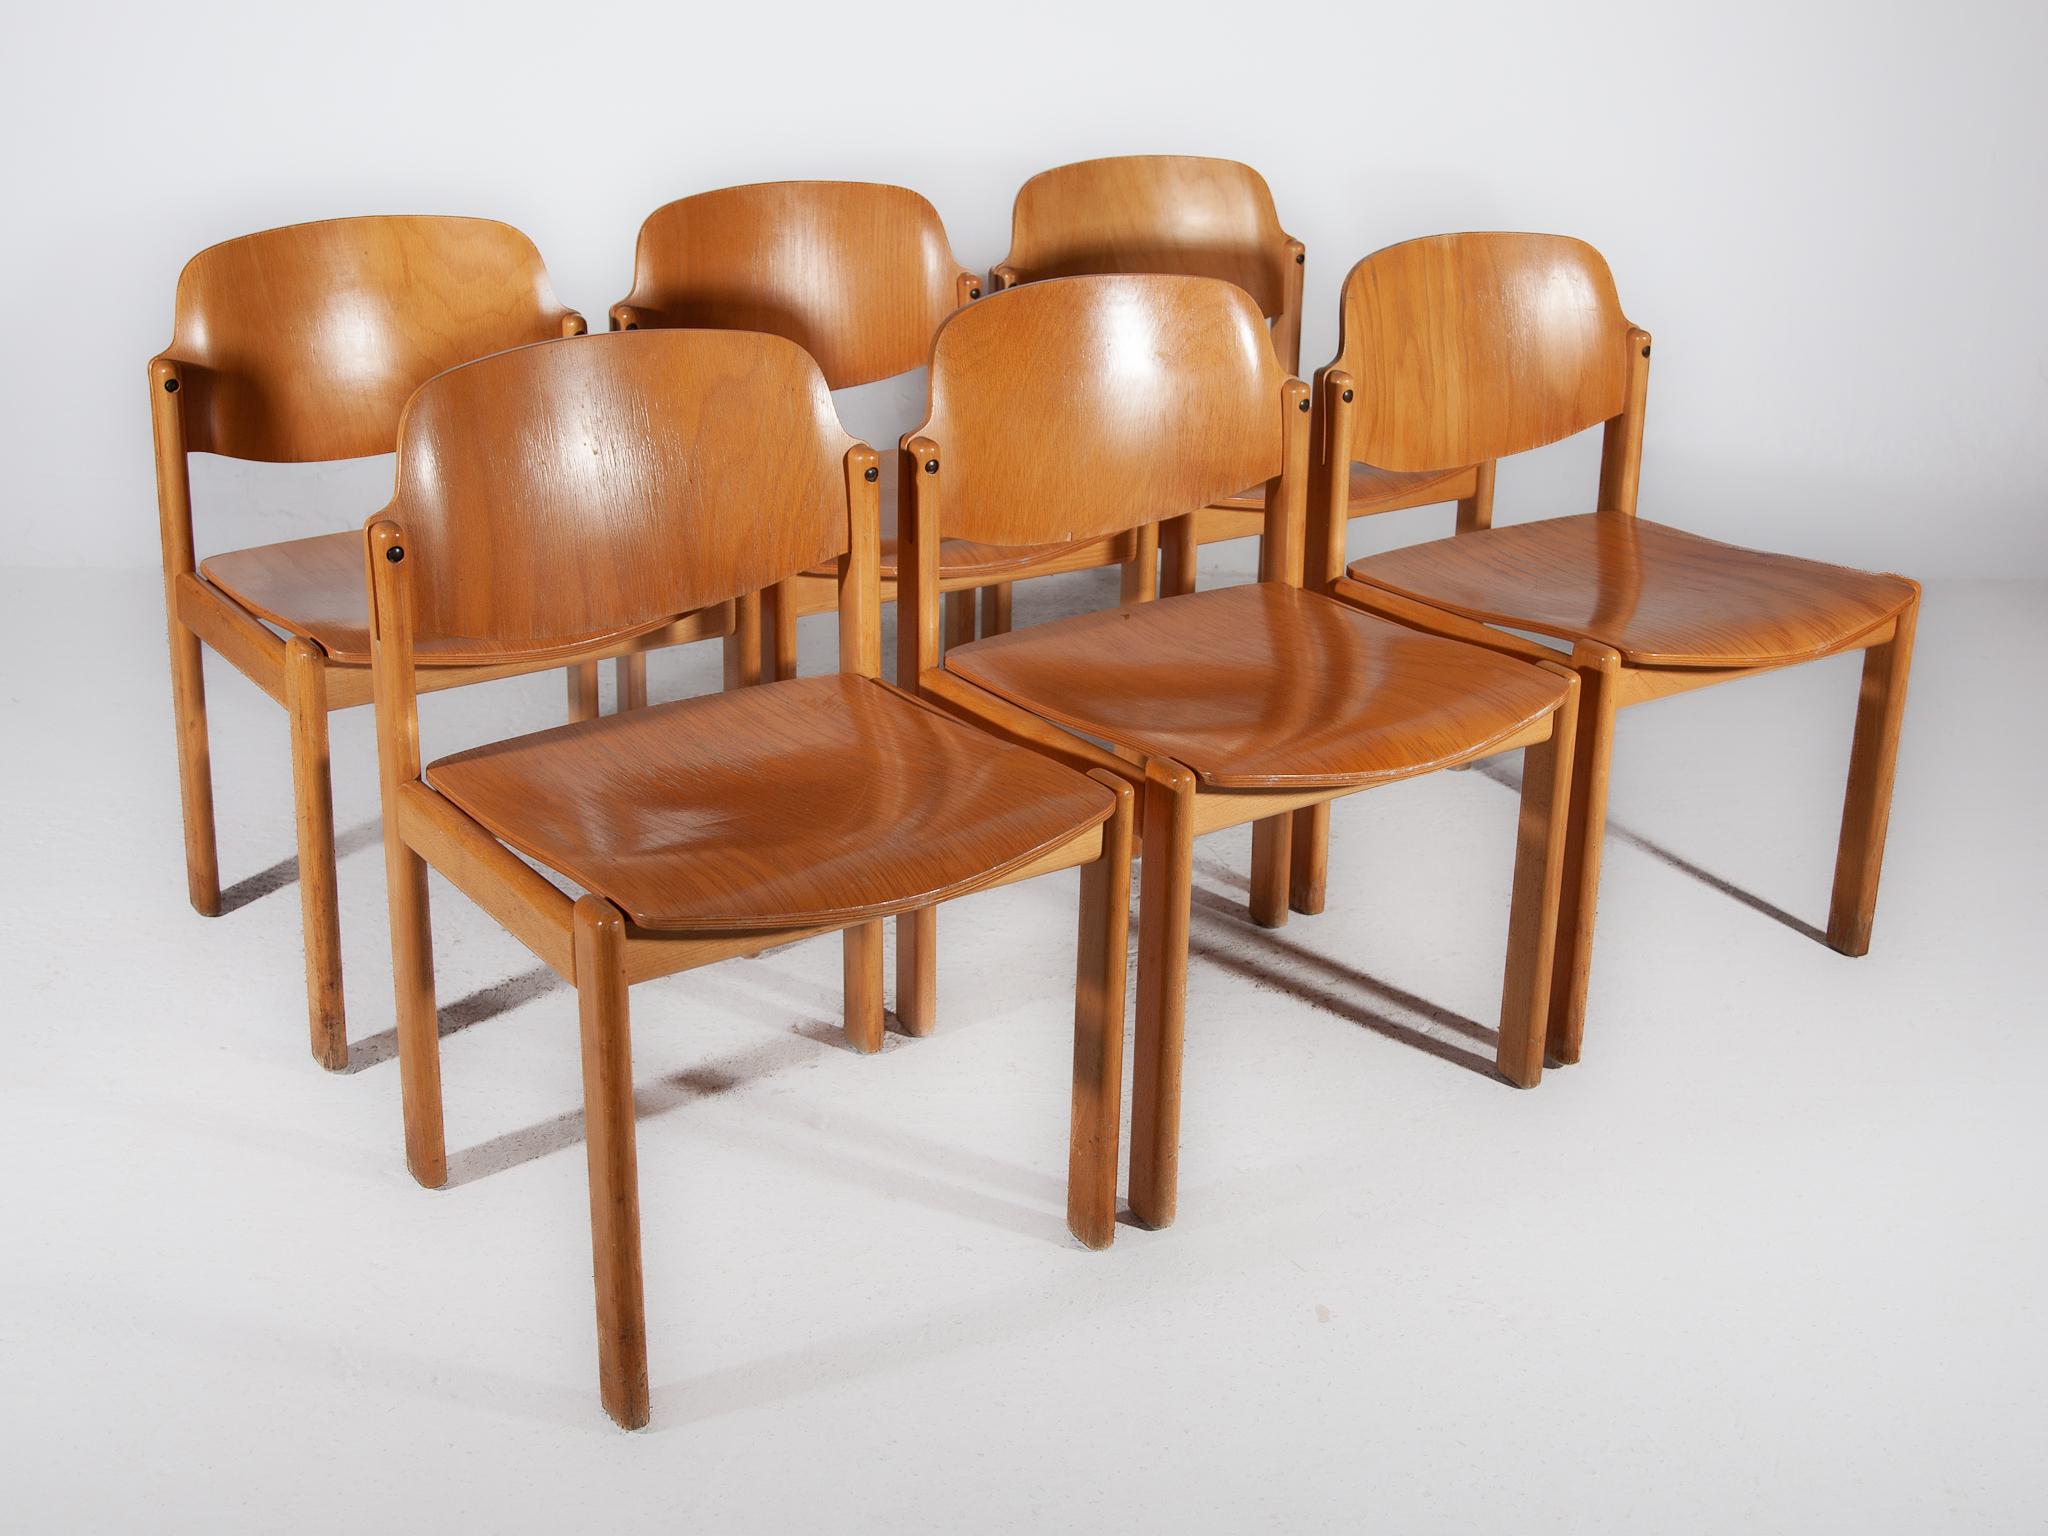 Set of Twelve Beech Wood Dining Chairs, Germany 1970s For Sale 5